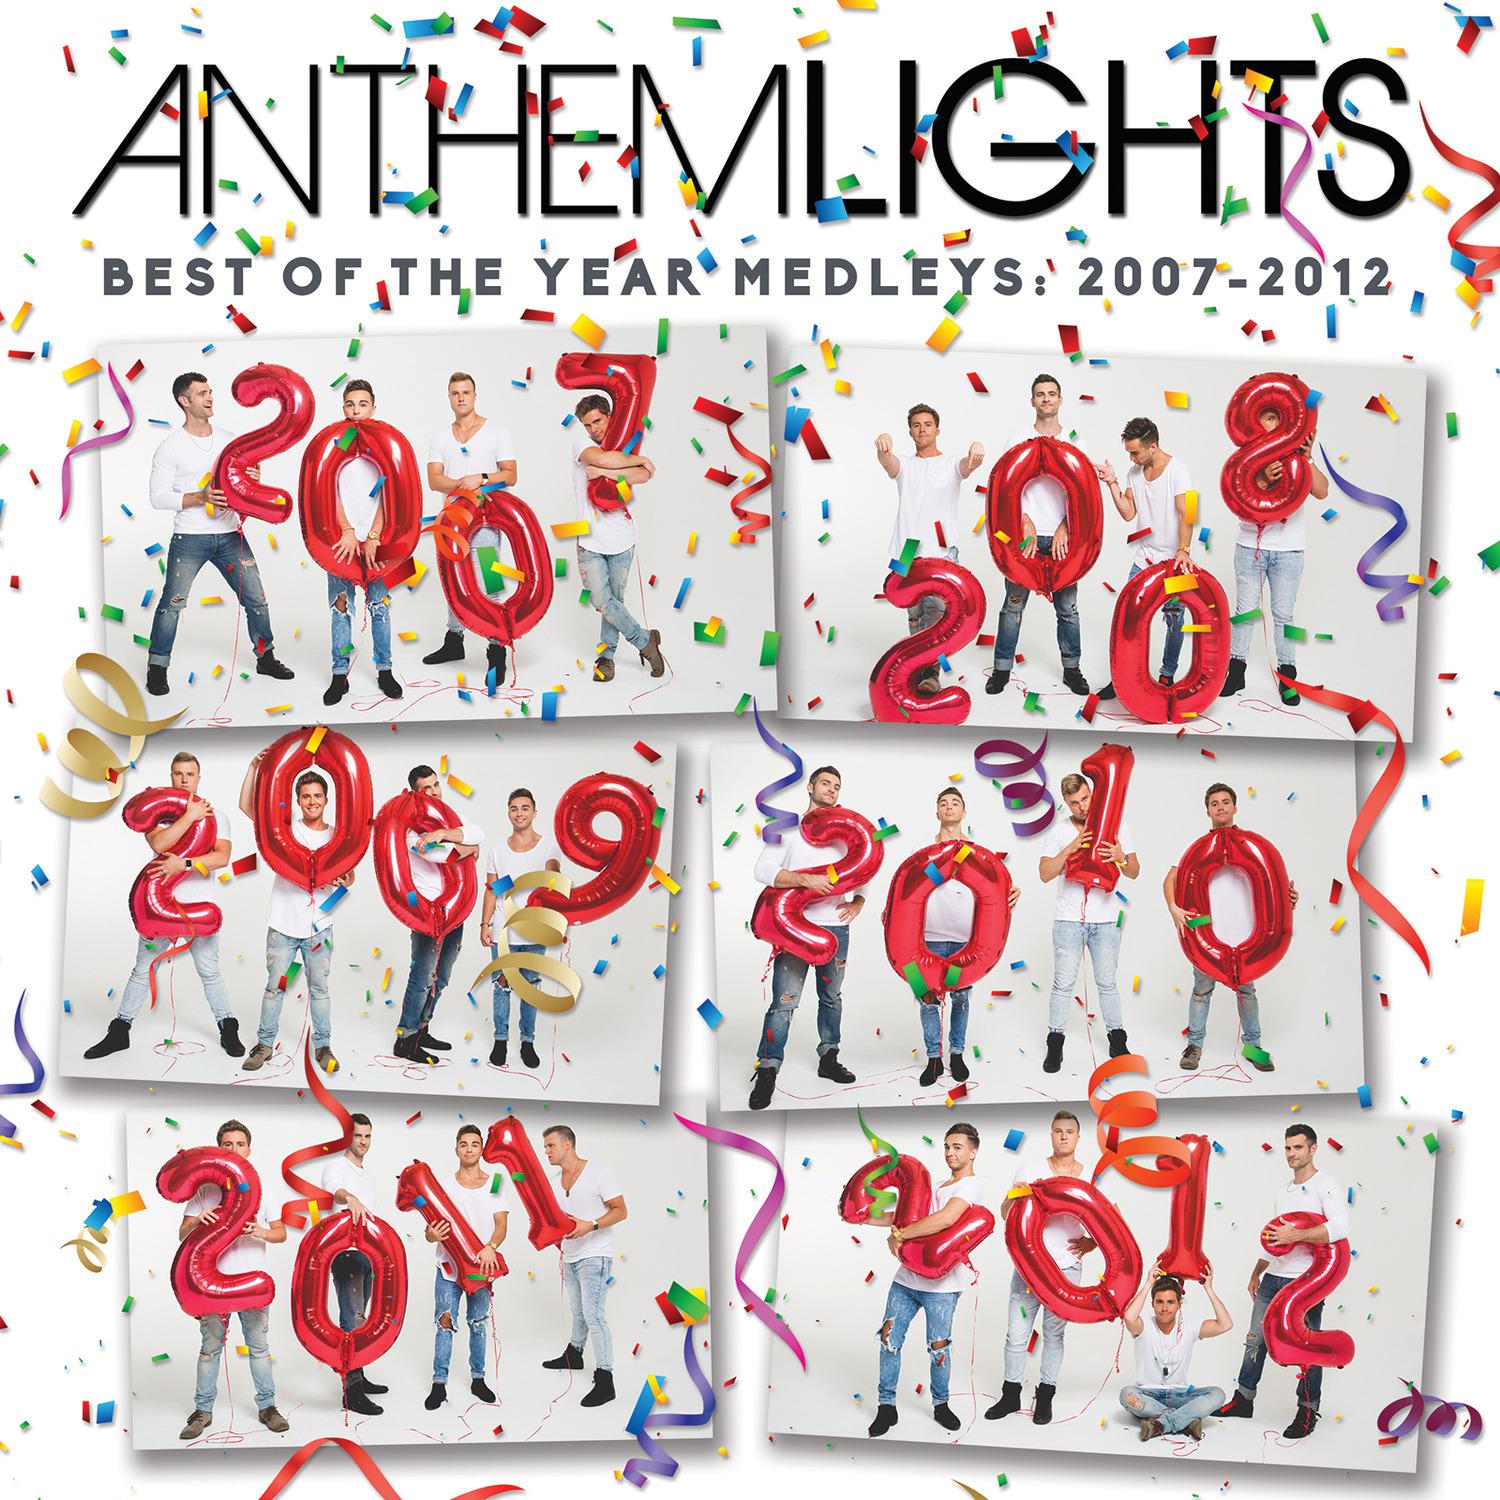 Best of 2008: With You / No One / Closer / Forever / Low / Bubbly歌词 歌手Anthem Lights-专辑Best of the Year Medleys: 2007 - 2012-单曲《Best of 2008: With You / No One / Closer / Forever / Low / Bubbly》LRC歌词下载